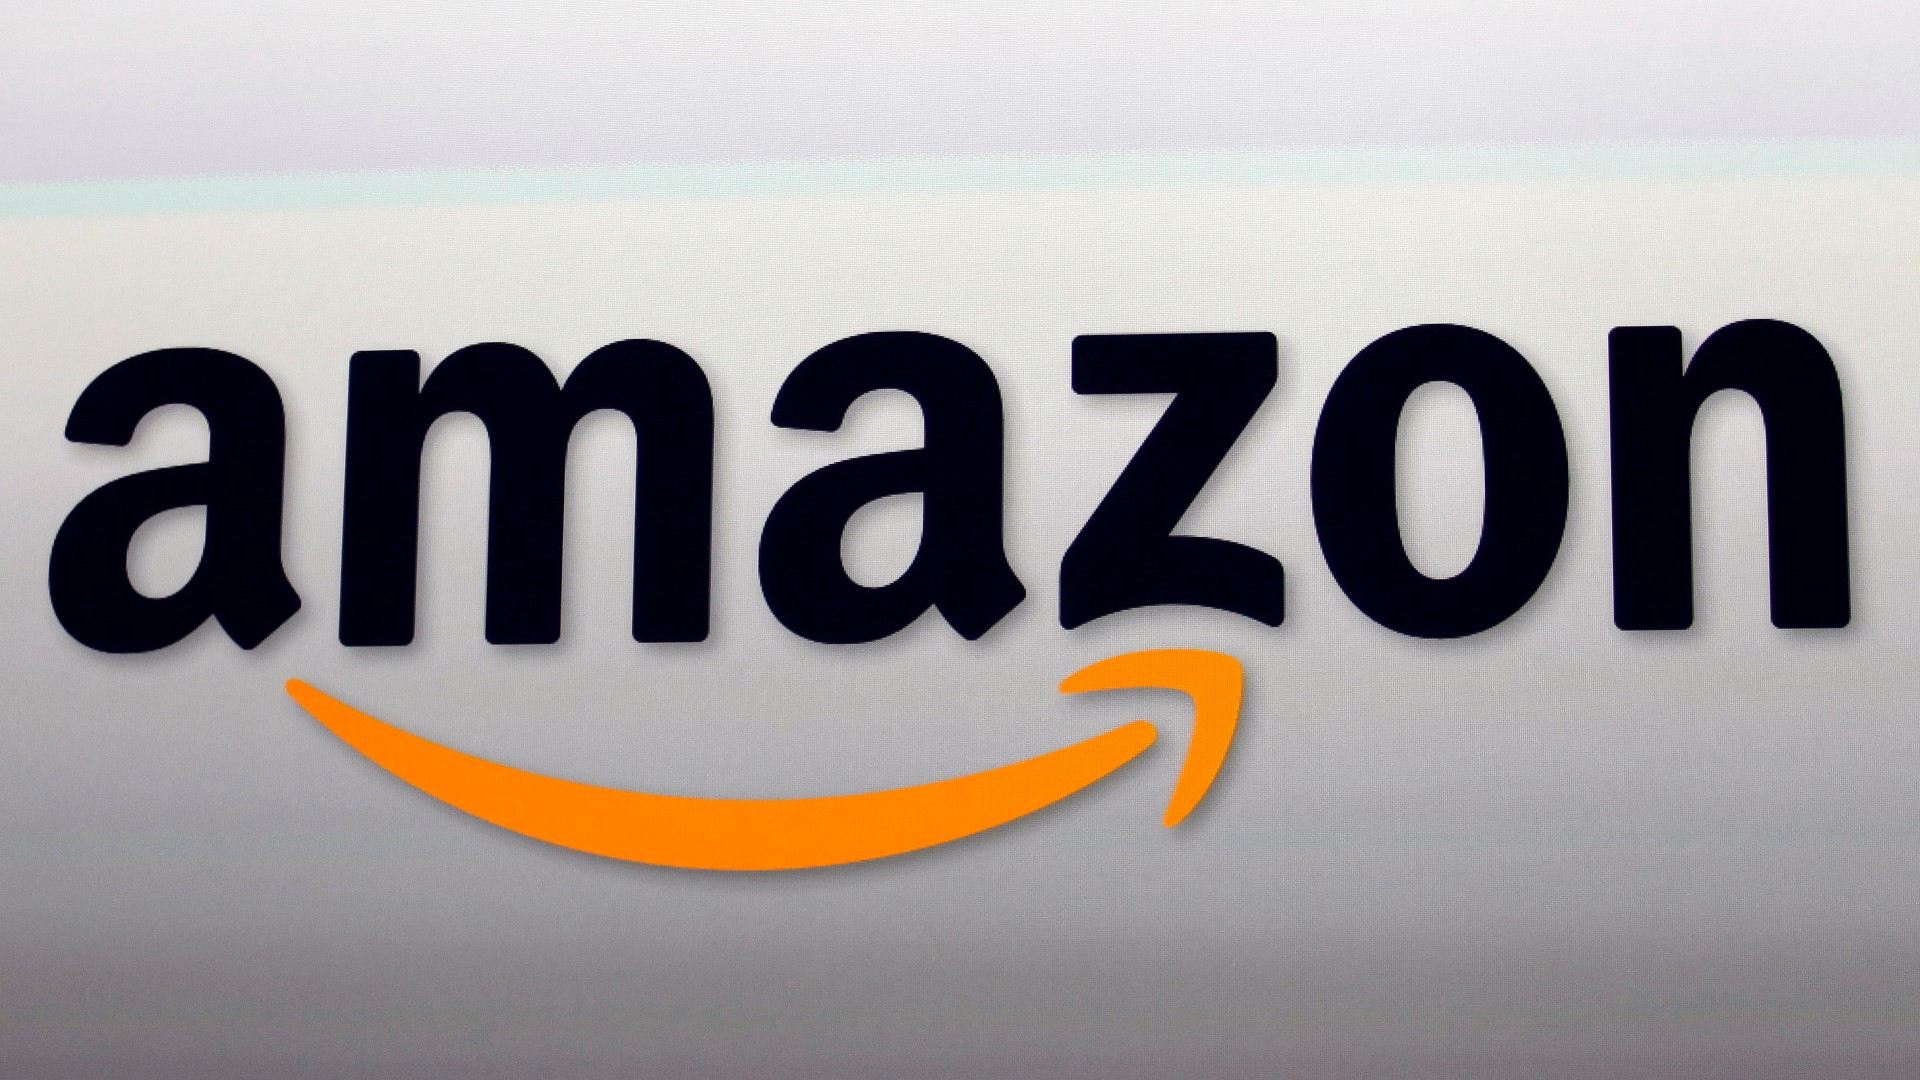 Amazon announced it will open a new facility in Lutz by 2021.